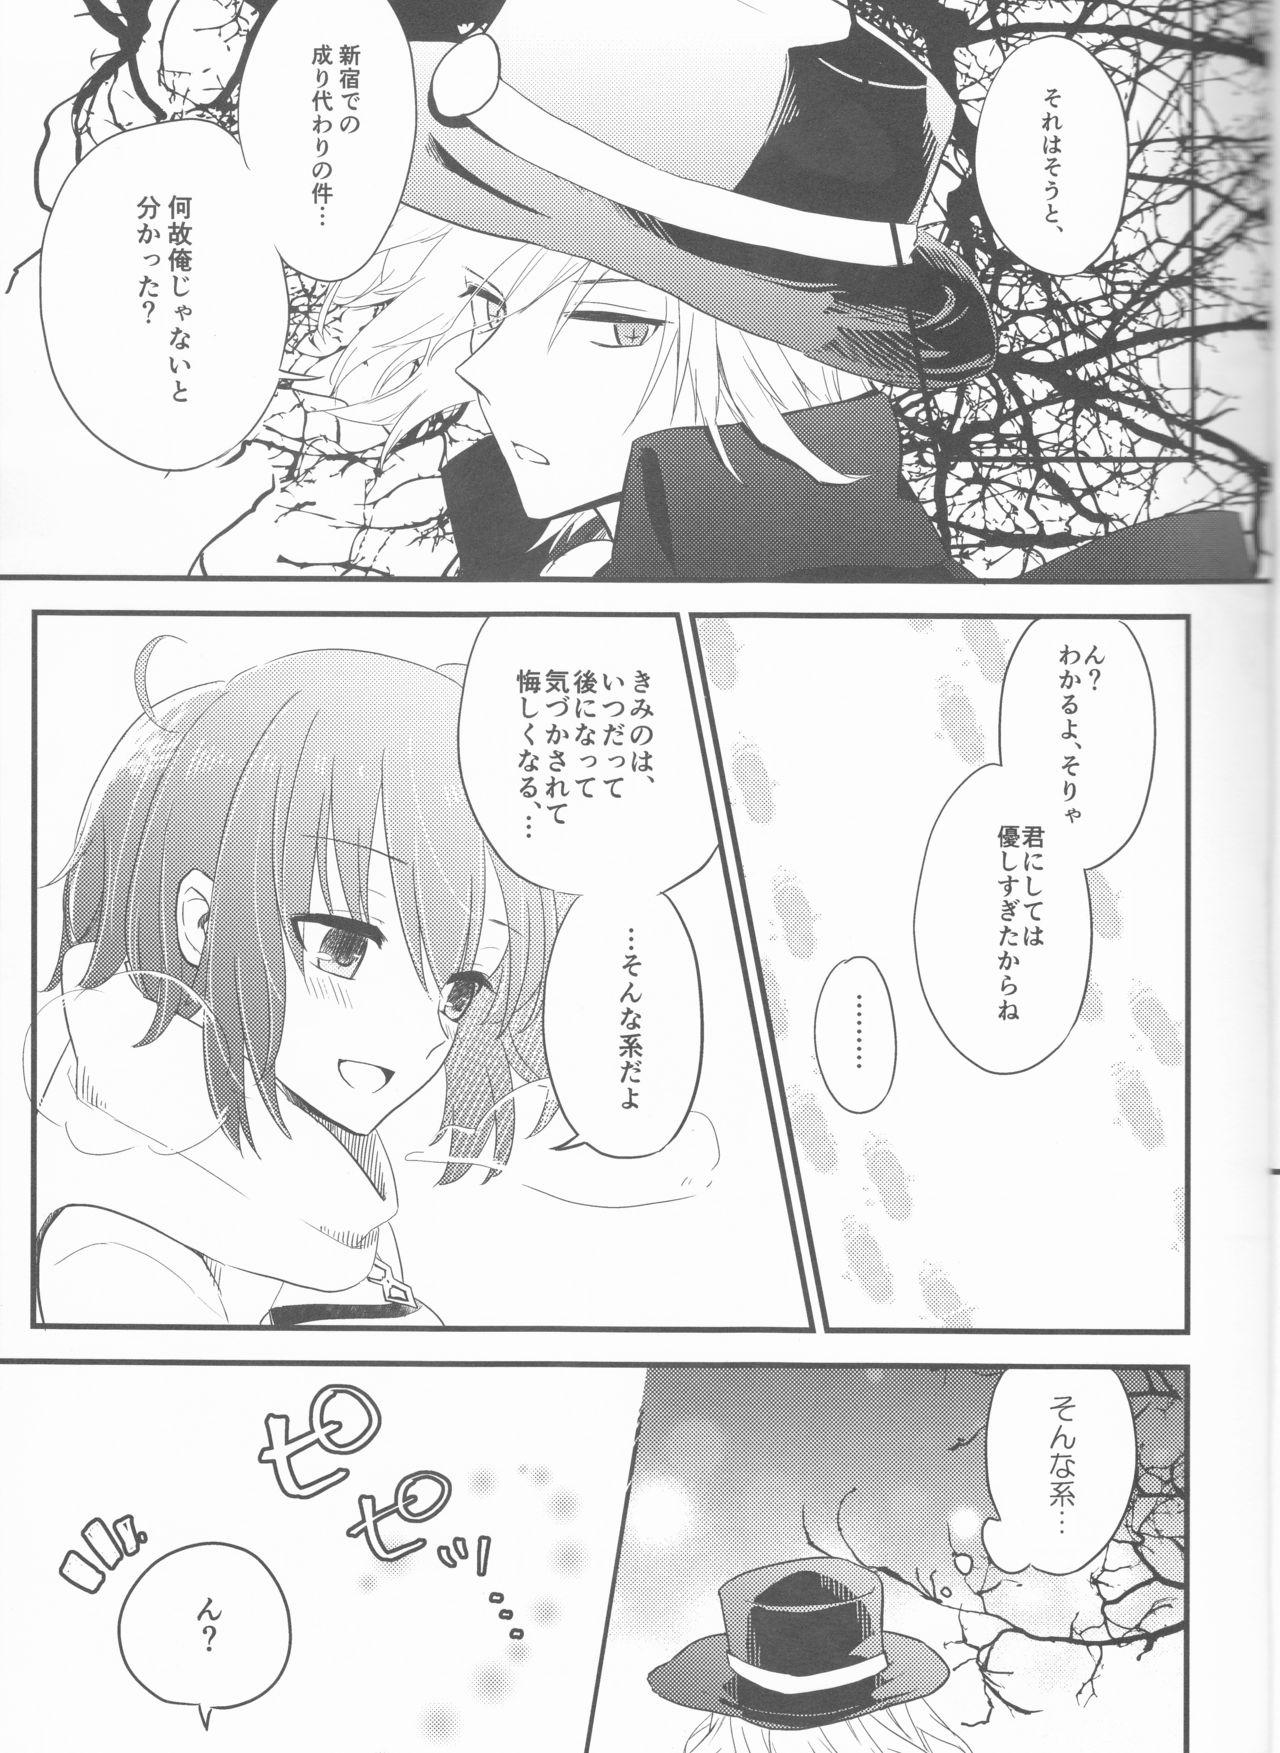 Flash Yume no Ondo - Warmth of the dream - Fate grand order Adult - Page 7